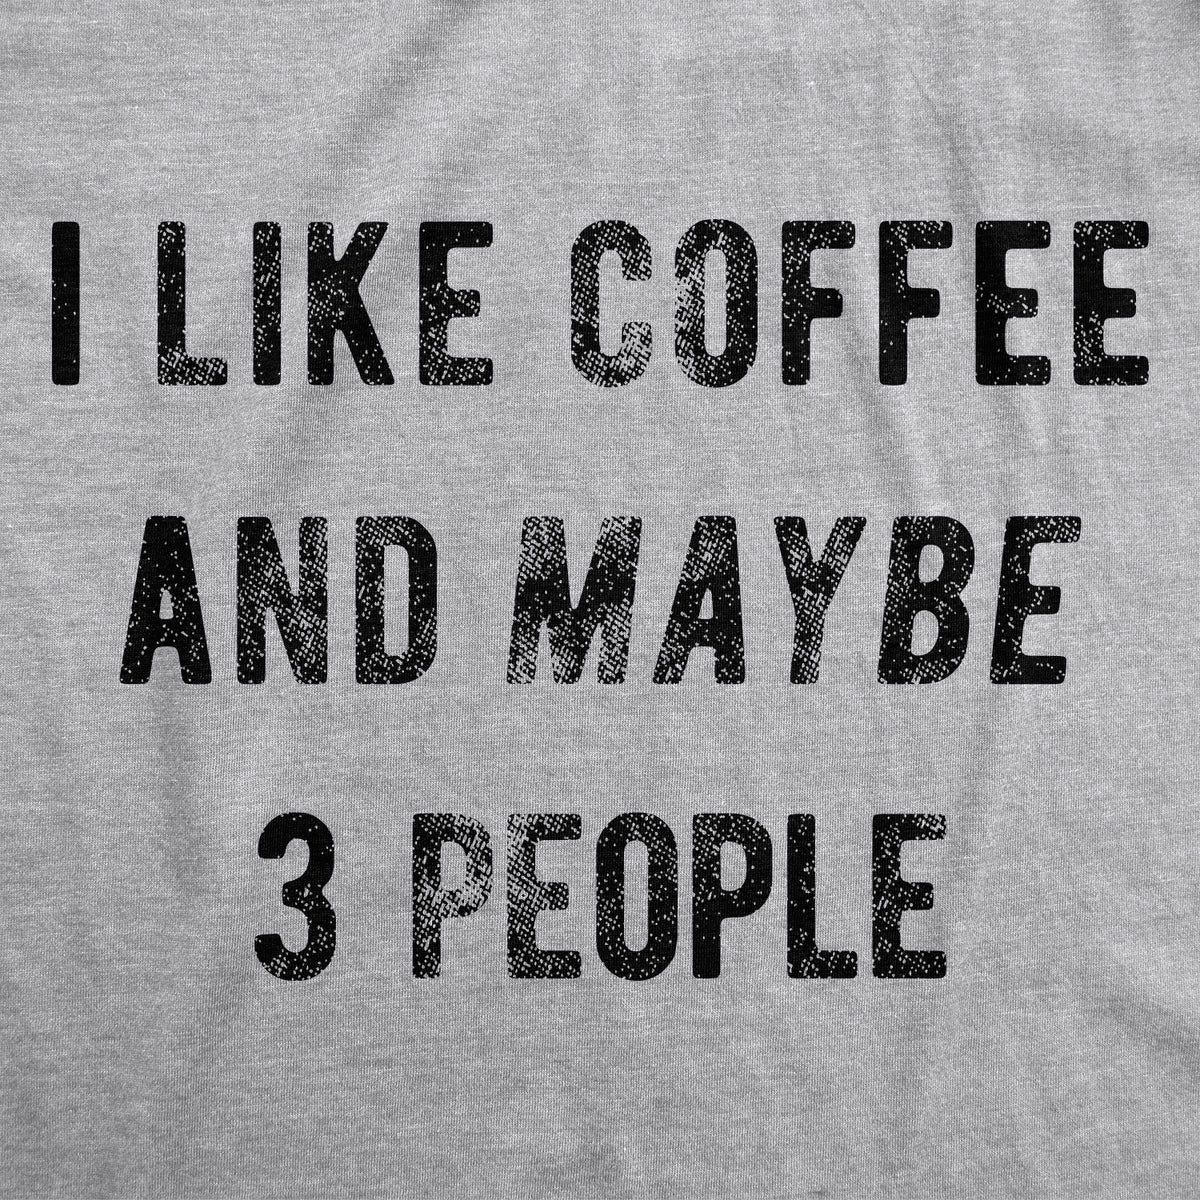 I Like Coffee And Maybe 3 People Women&#39;s T Shirt